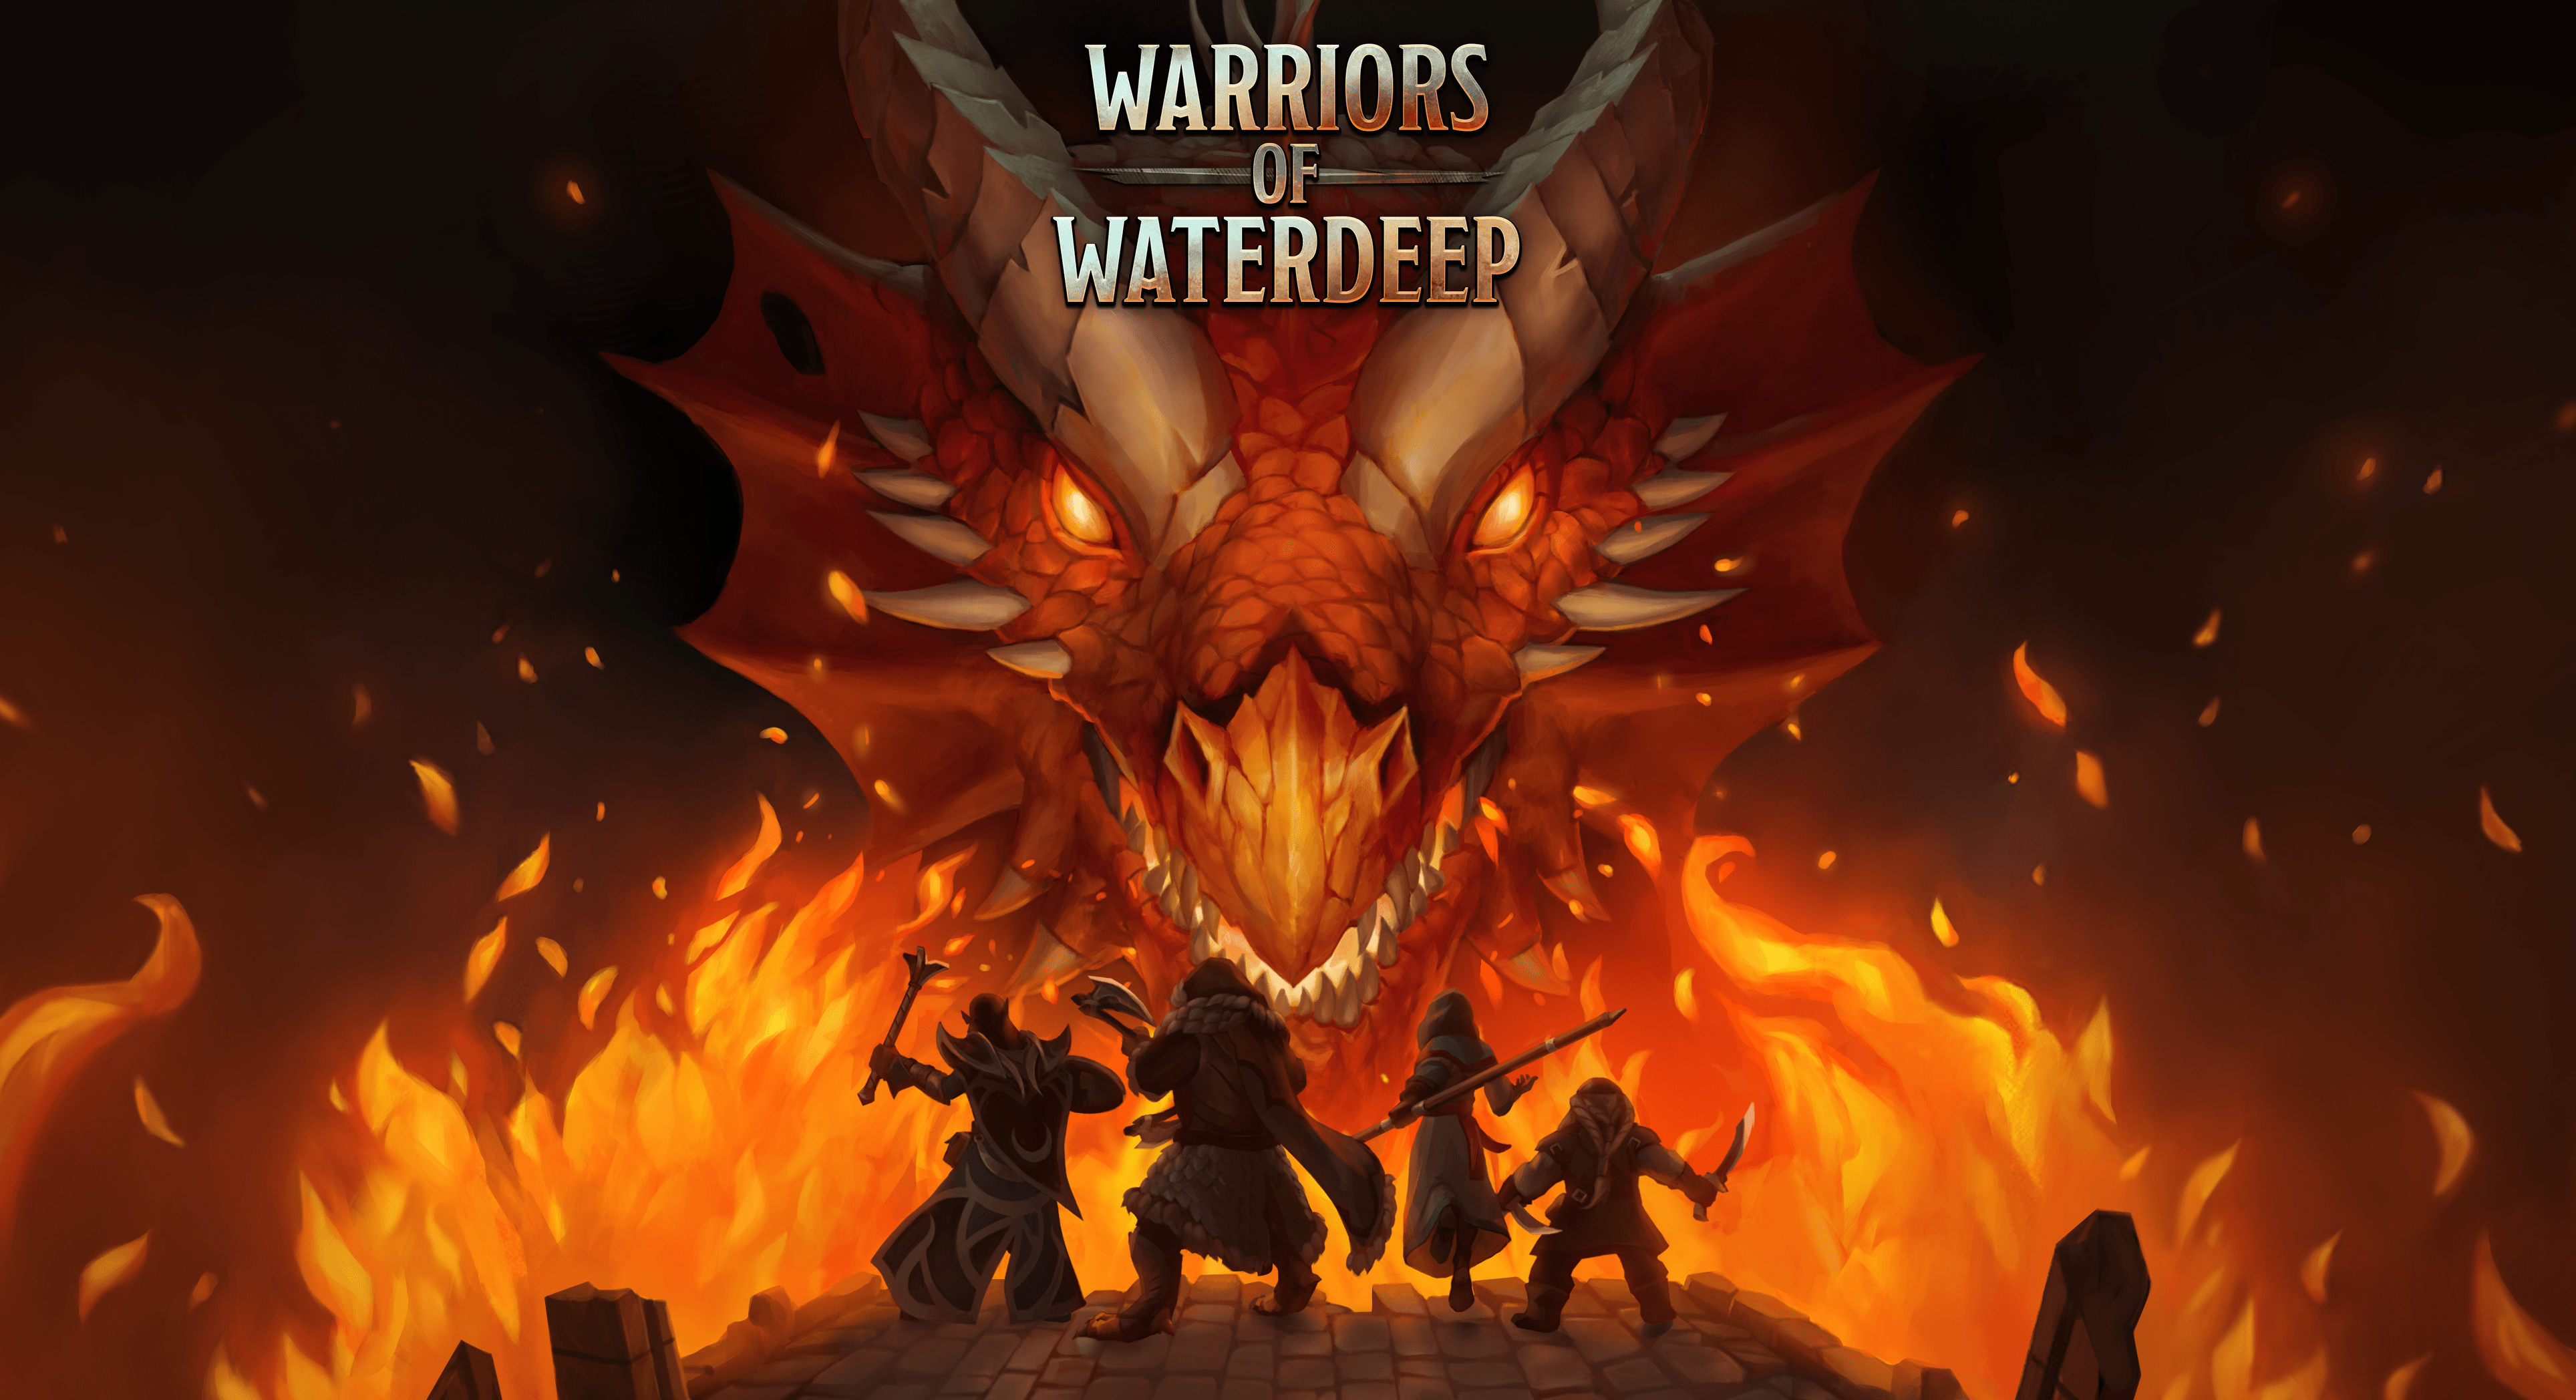 Warriors of Waterdeep D&D mobile RPG launches on iOS and Android